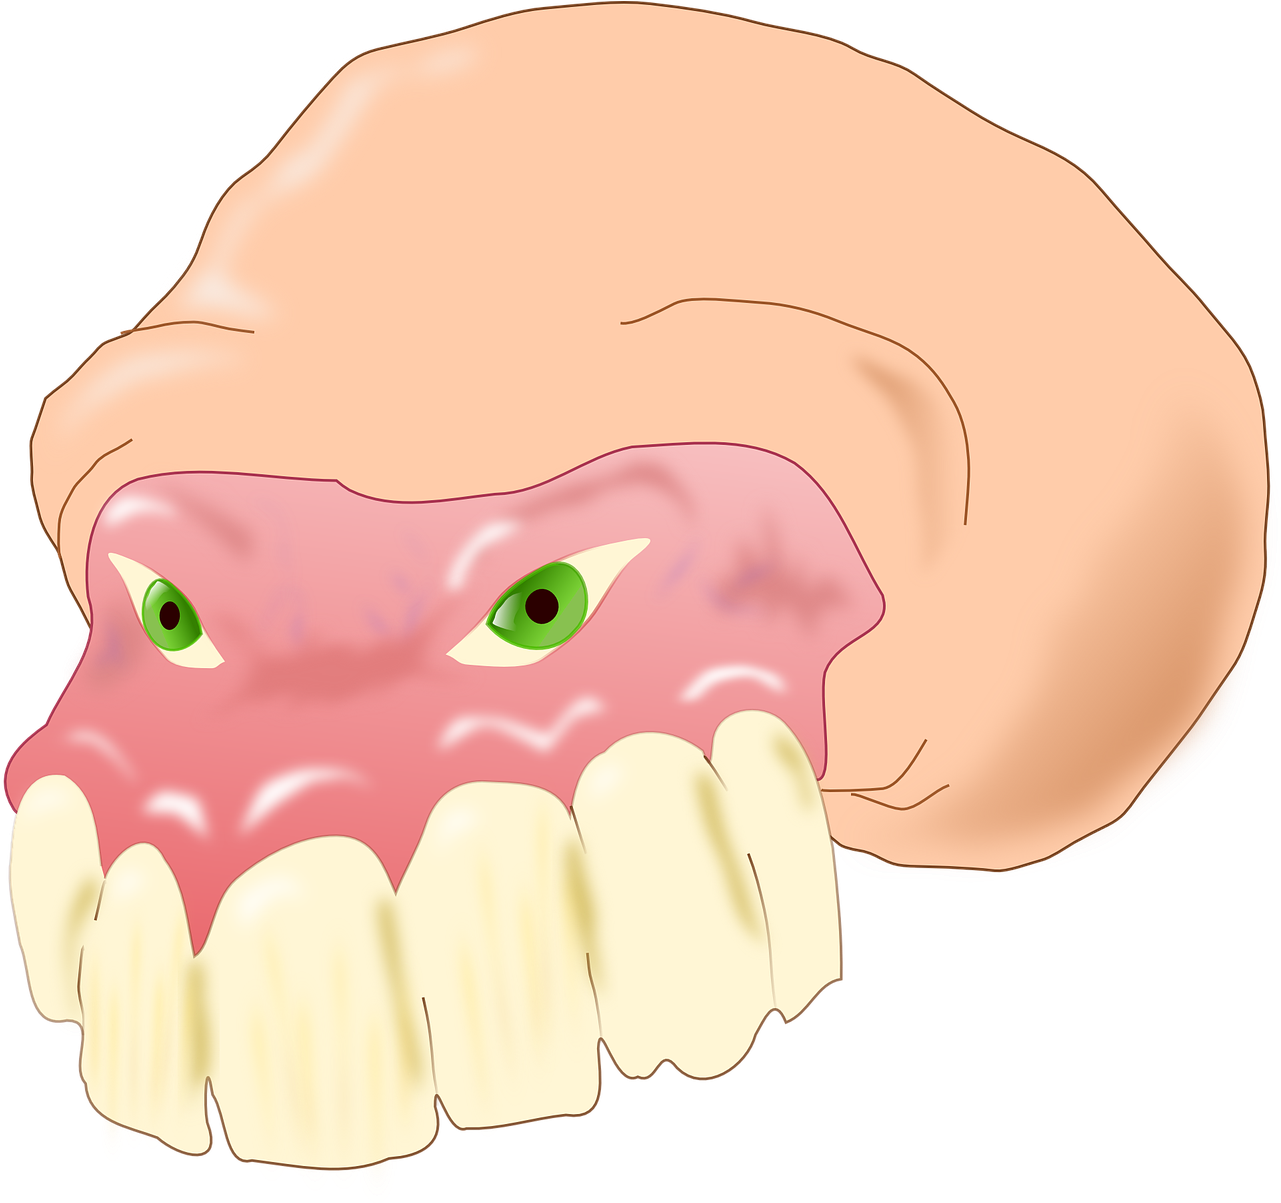 Animated Molar Toothwith Gums